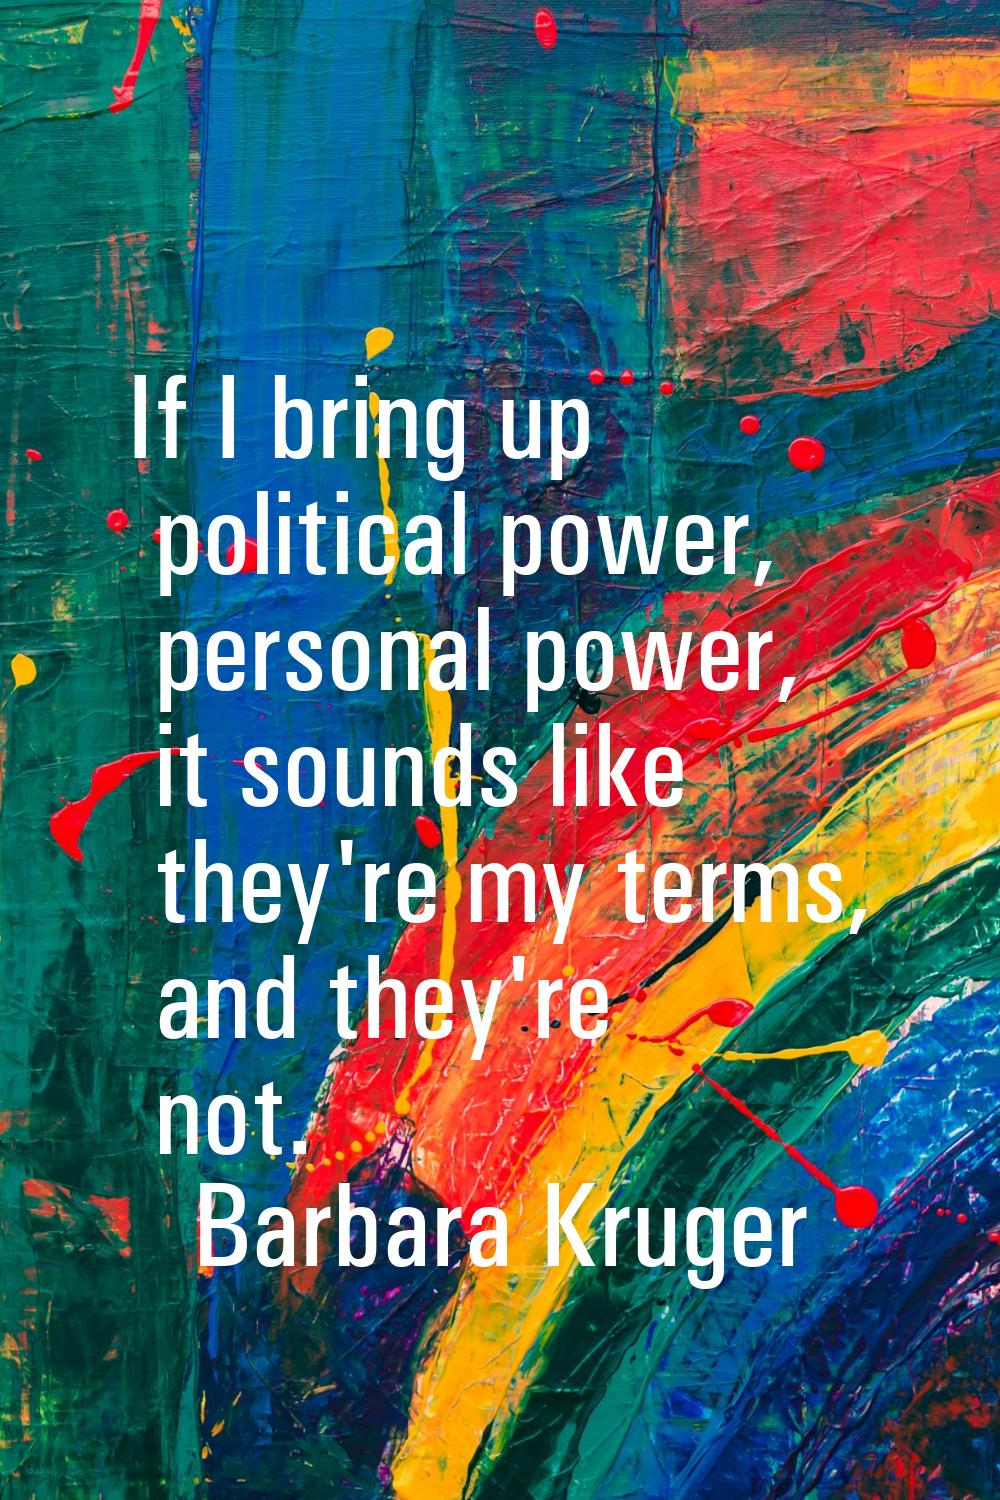 If I bring up political power, personal power, it sounds like they're my terms, and they're not.